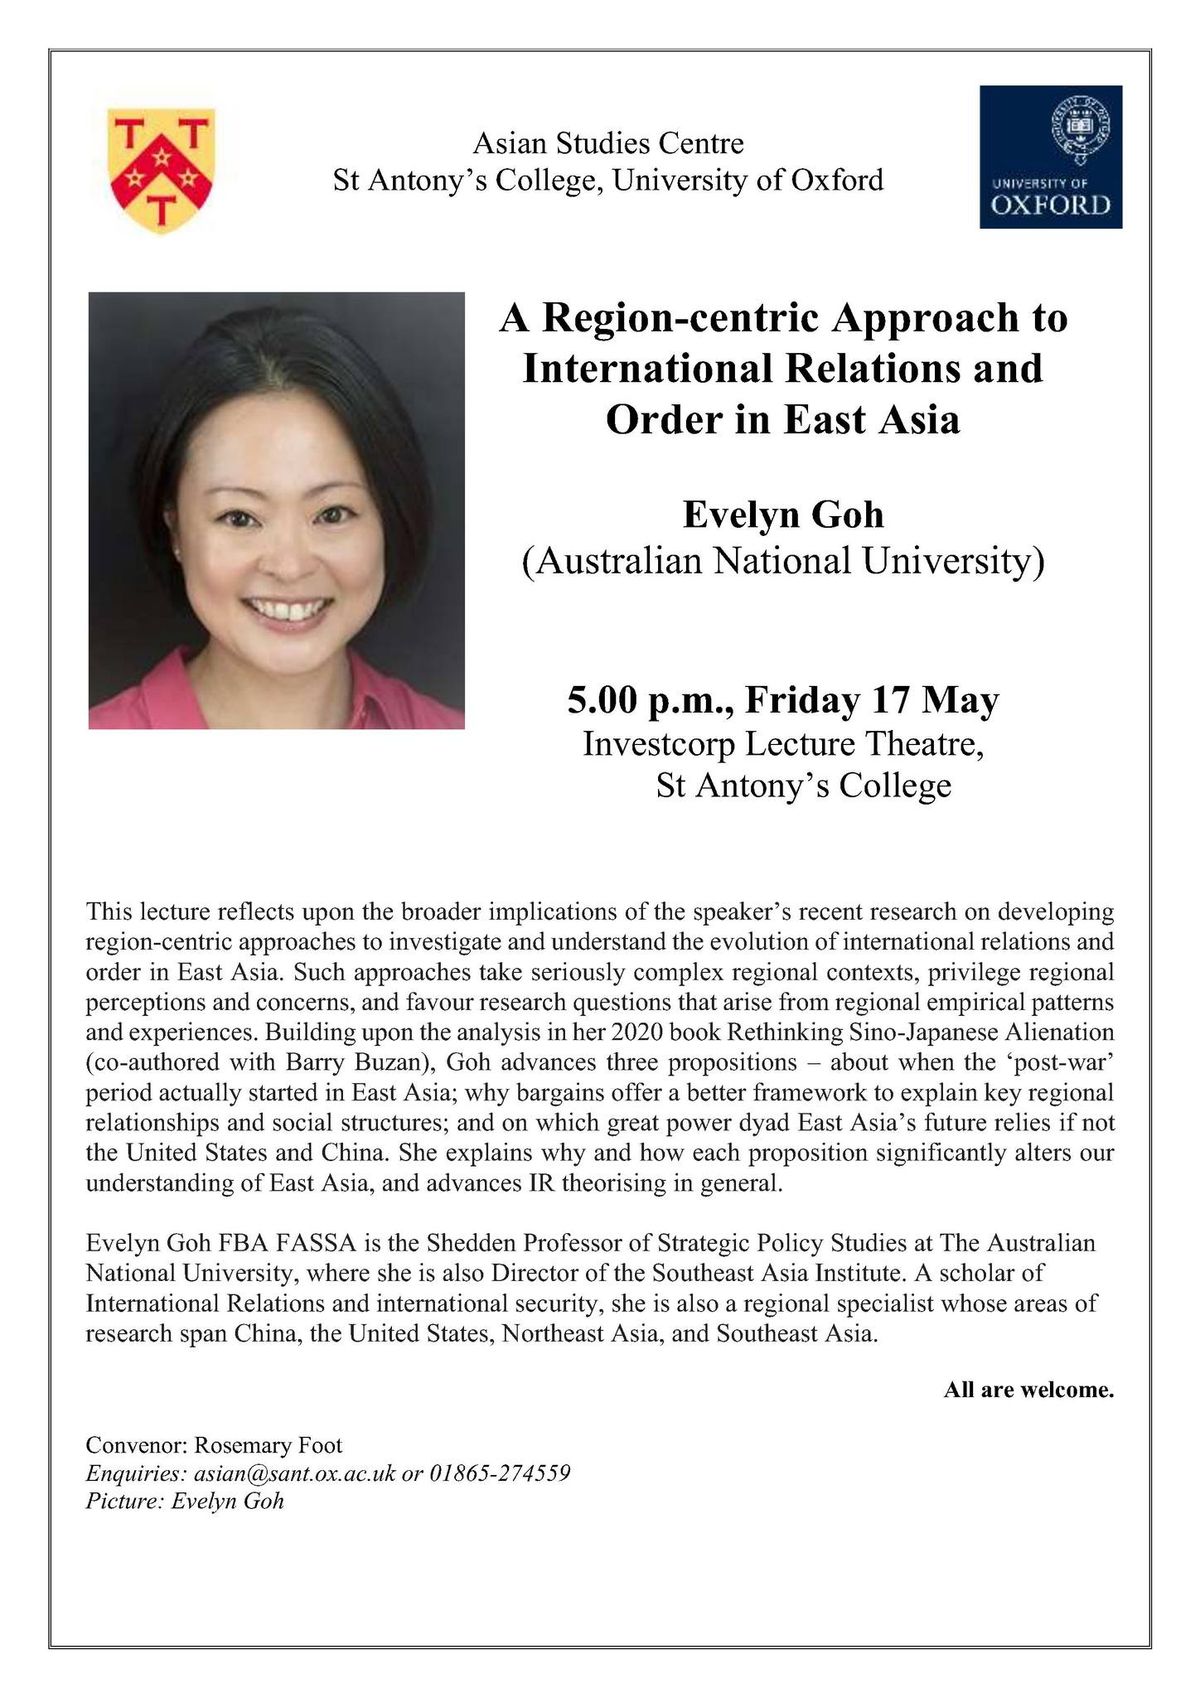 A Region-centric Approach to International Relations and Order in East Asia with Evelyn Goh